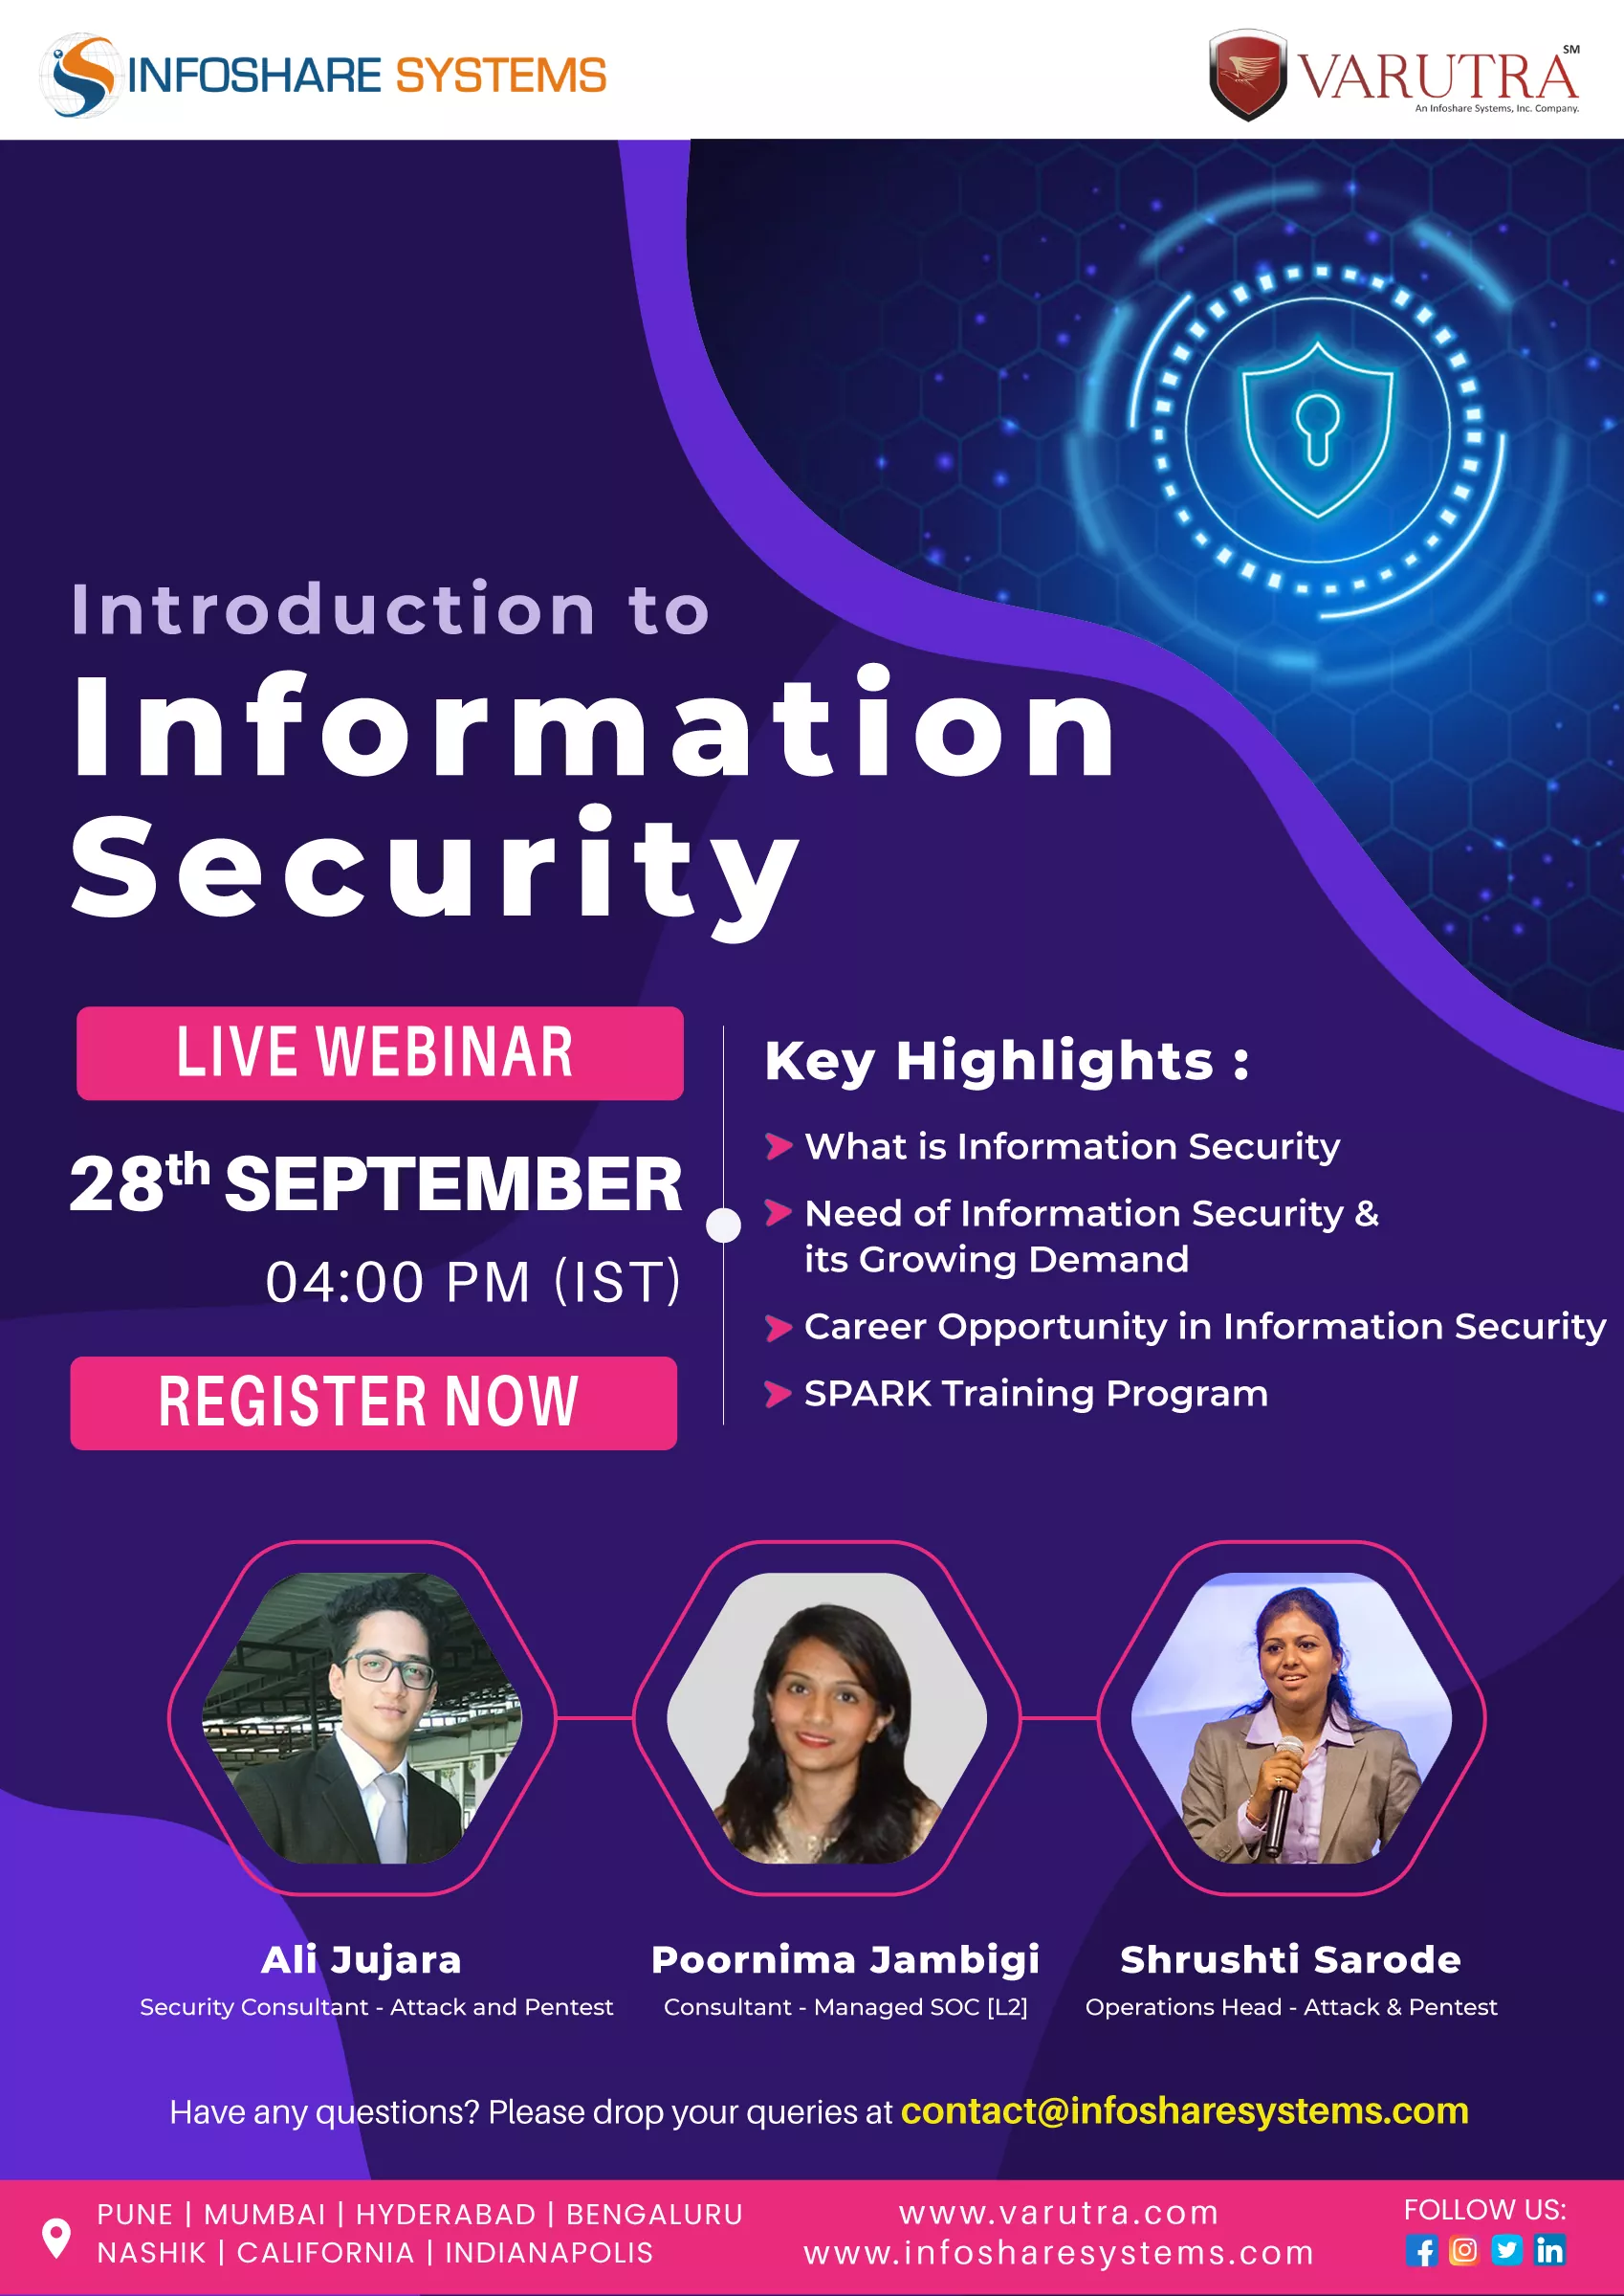 https://www.varutra.com/company-events/webinar-introduction-to-information-security/